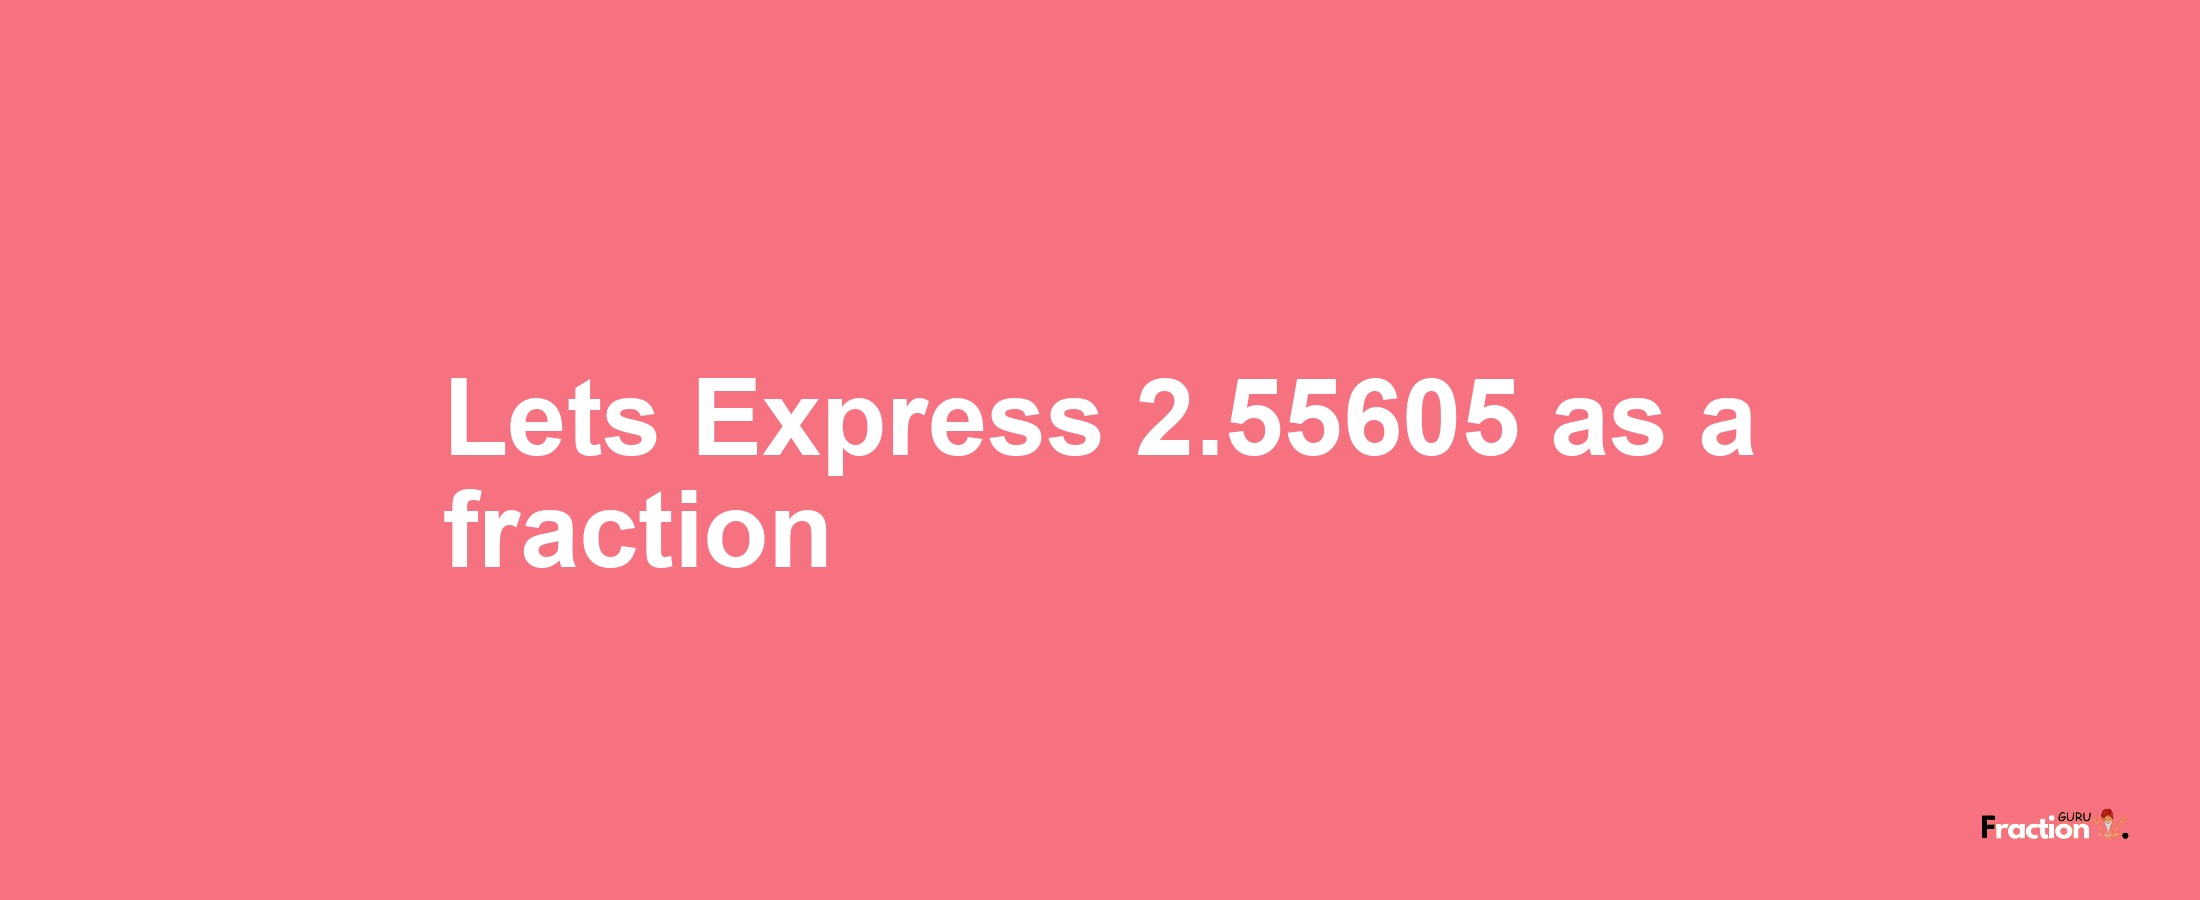 Lets Express 2.55605 as afraction